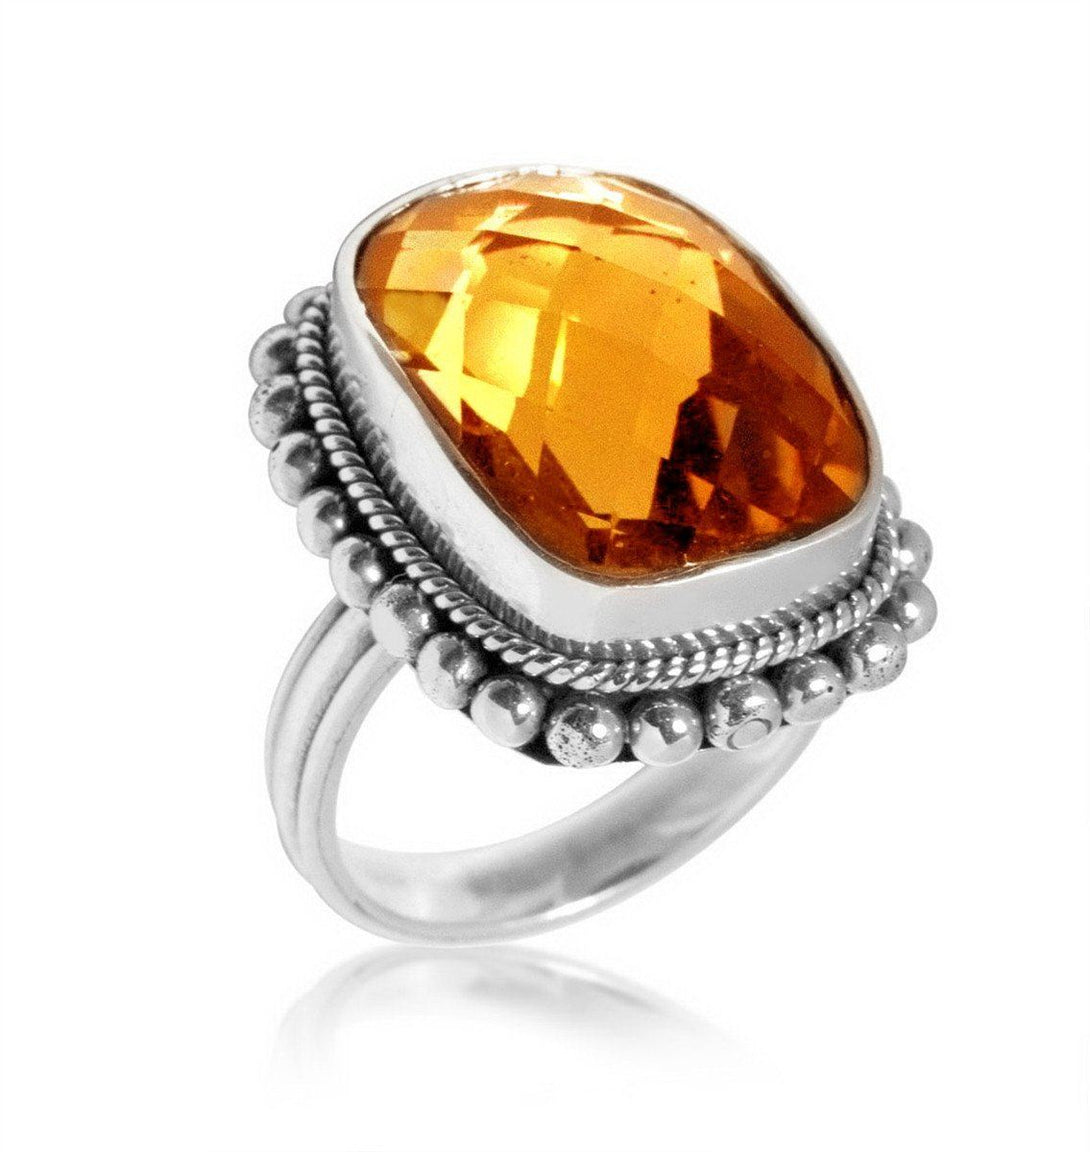 AR-6062-CT-6" Sterling Silver Ring With Citrine Q. Jewelry Bali Designs Inc 